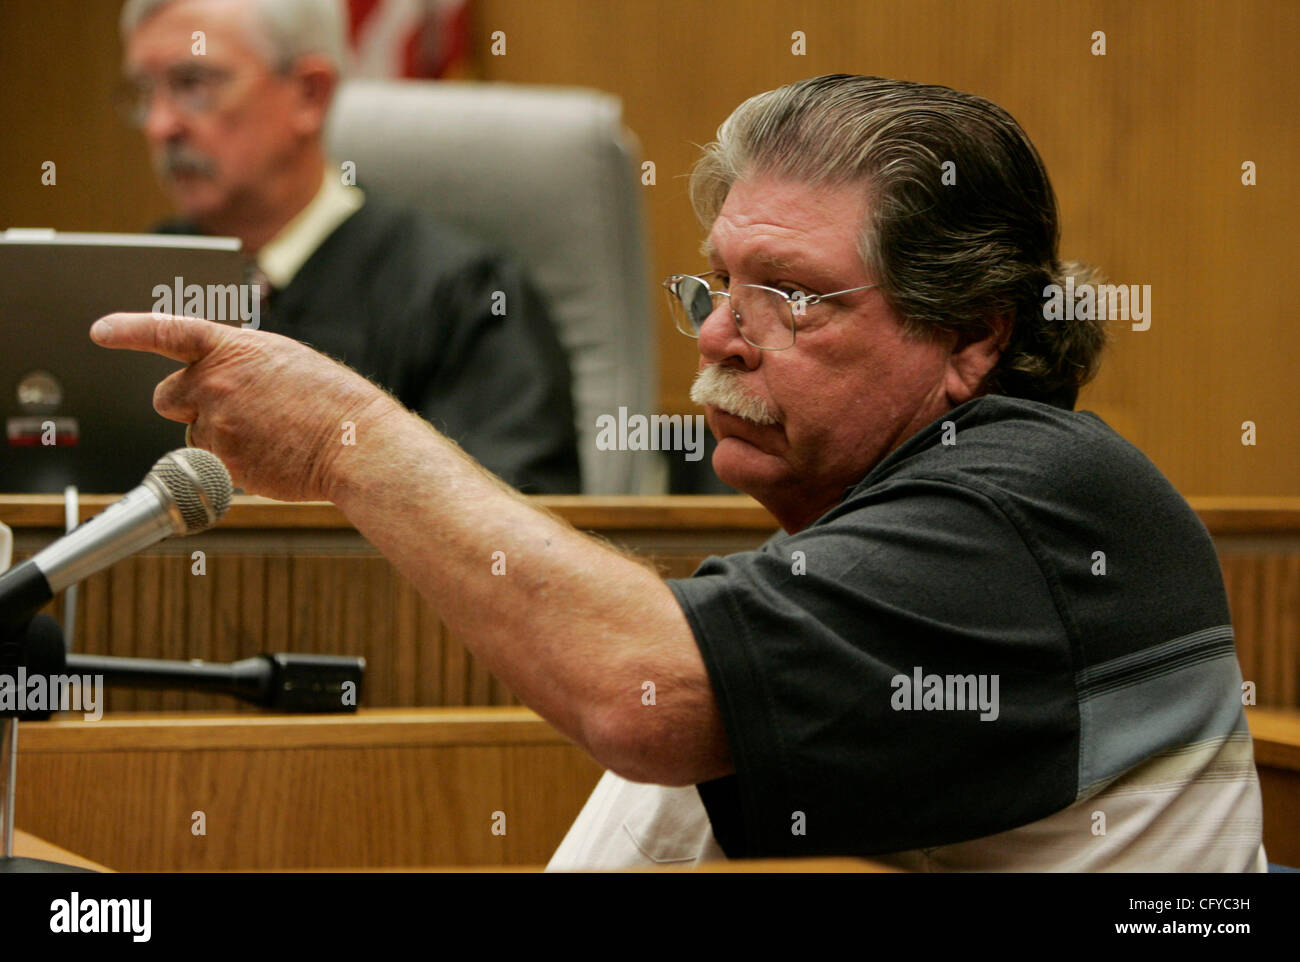 May 14, 2007, El Cajon , CA, USA.  JAMES MAXWELL points out his son-in-law, former Sheriff's deputy LOWELL 'SAM' BRUCE, in court in El Cajon Monday during the preliminary trial in which BRUCE is charged with killing his wife of 11 years, shooting her in the face in the couple's bedroom in front of t Stock Photo